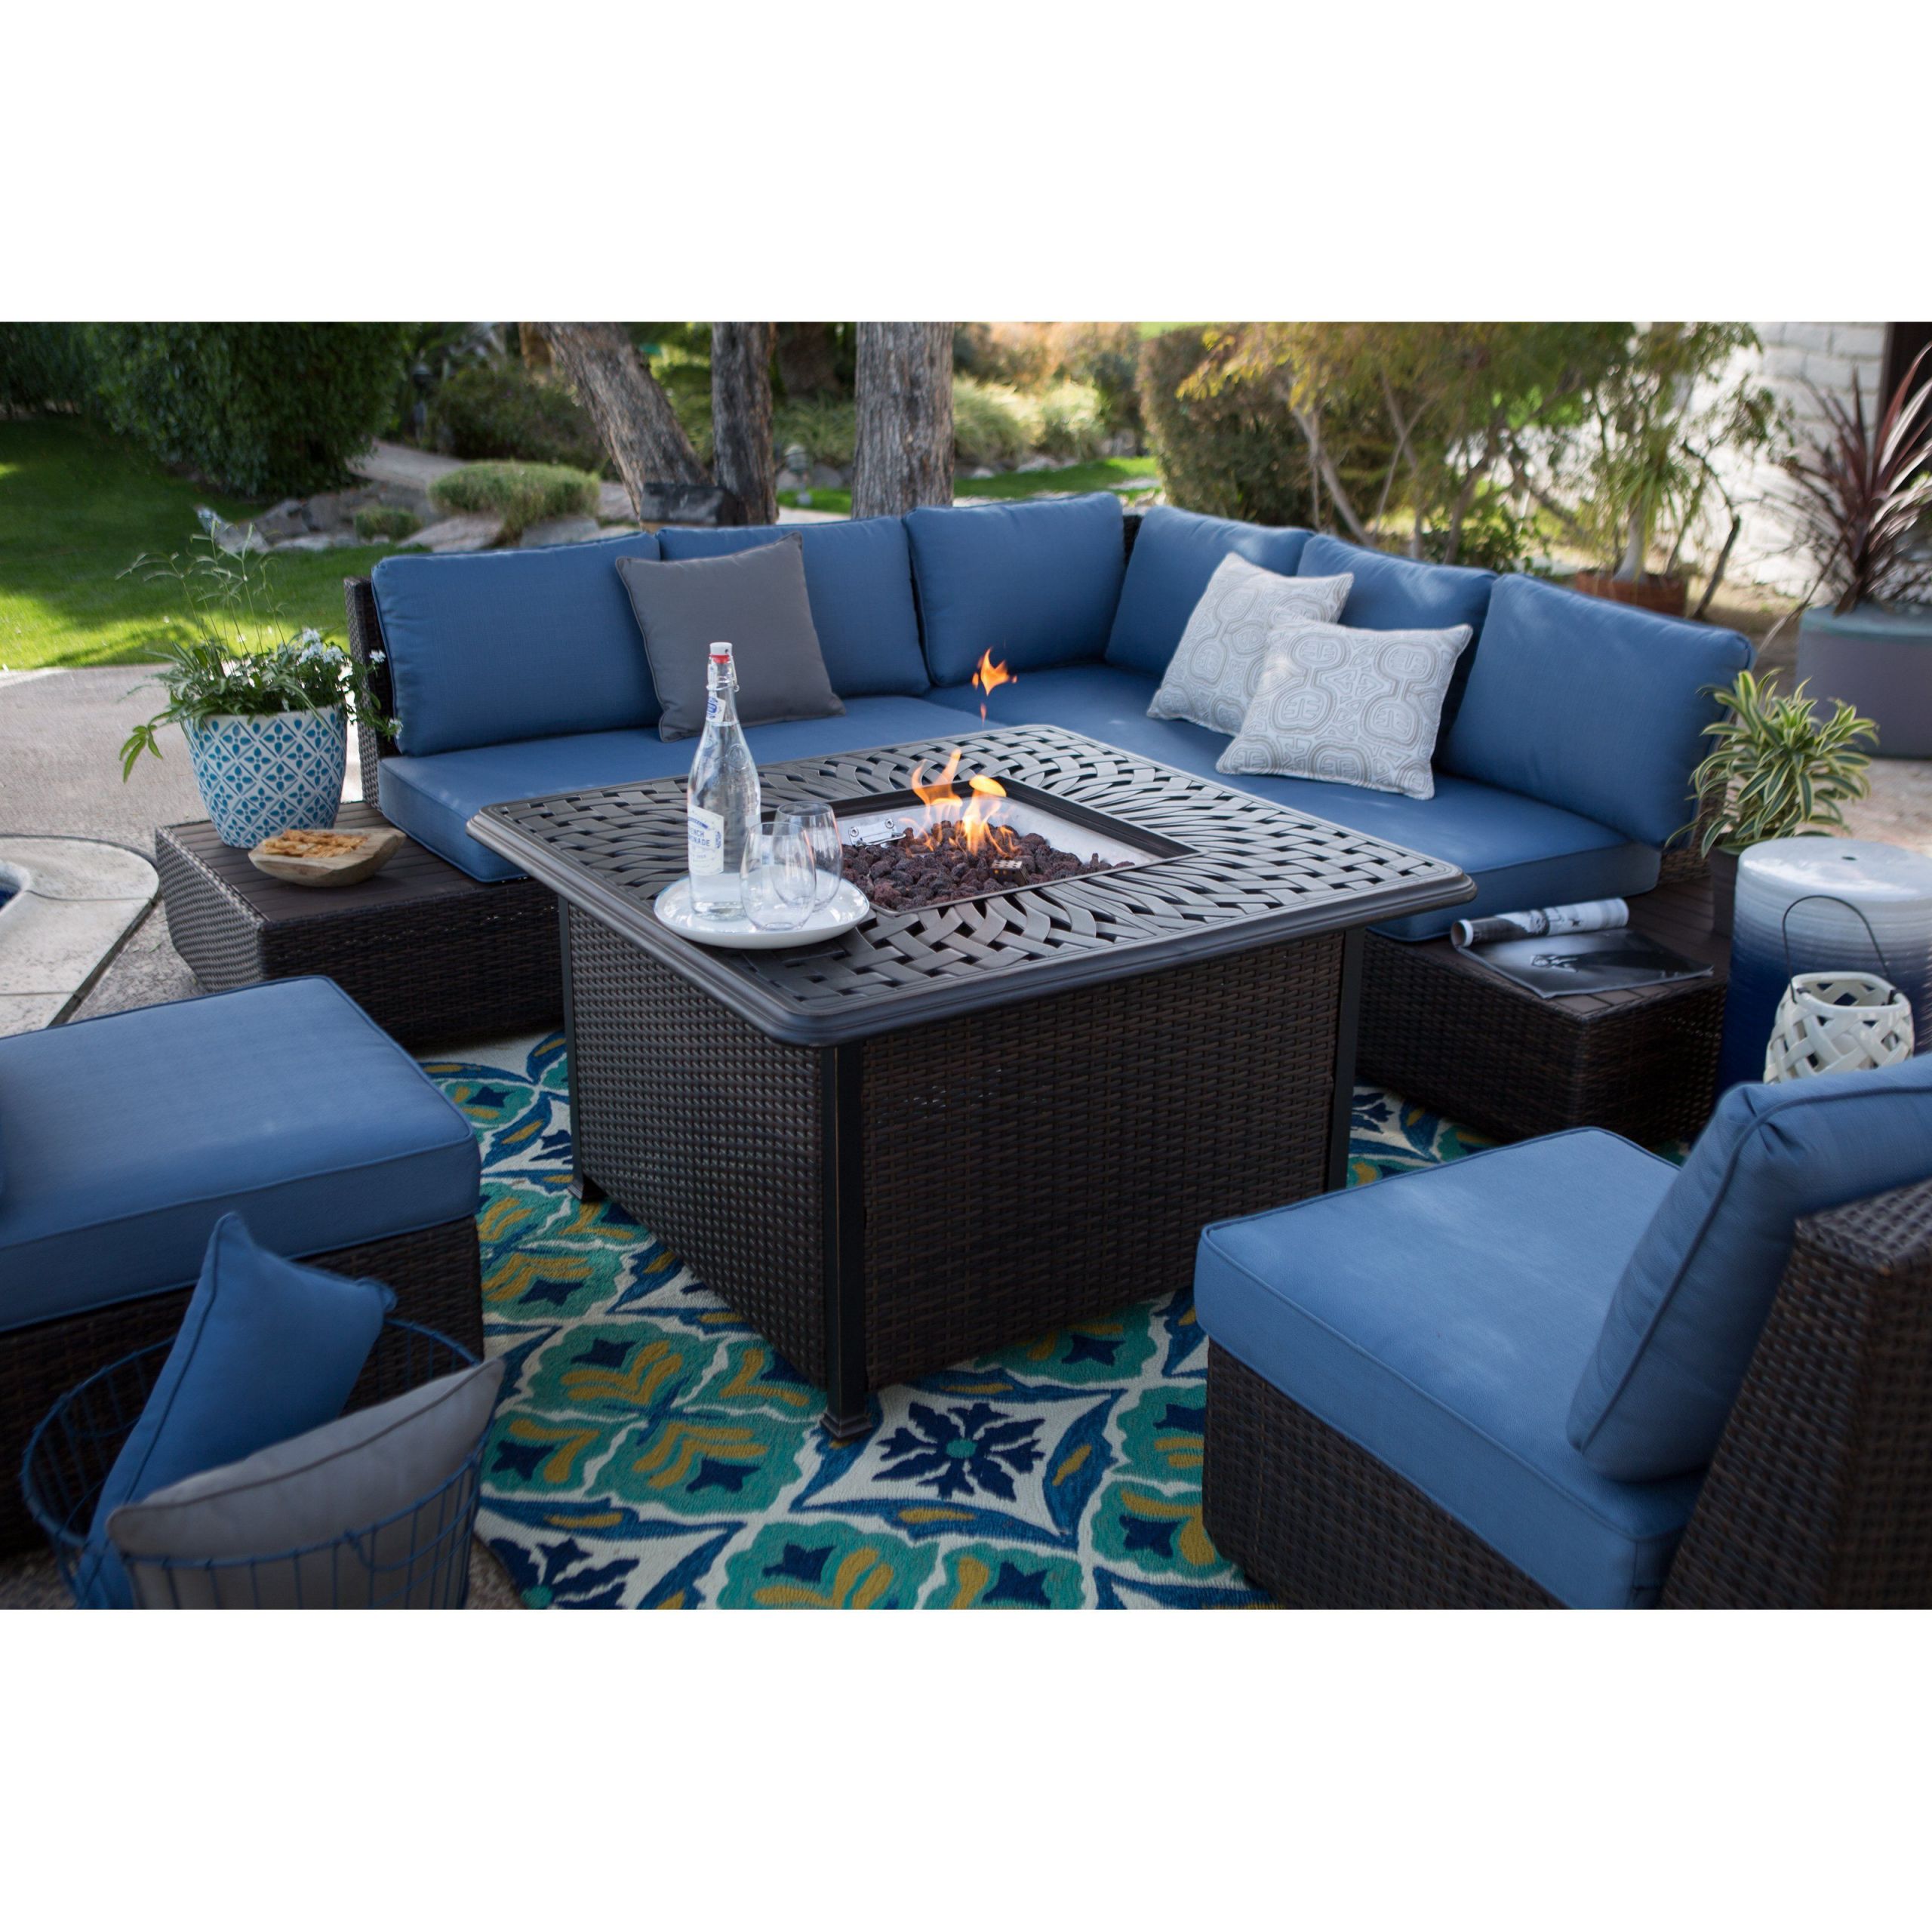 Firepit Patio Sets
 Belham Living Luciana Bay Wicker Sofa Sectional Set with